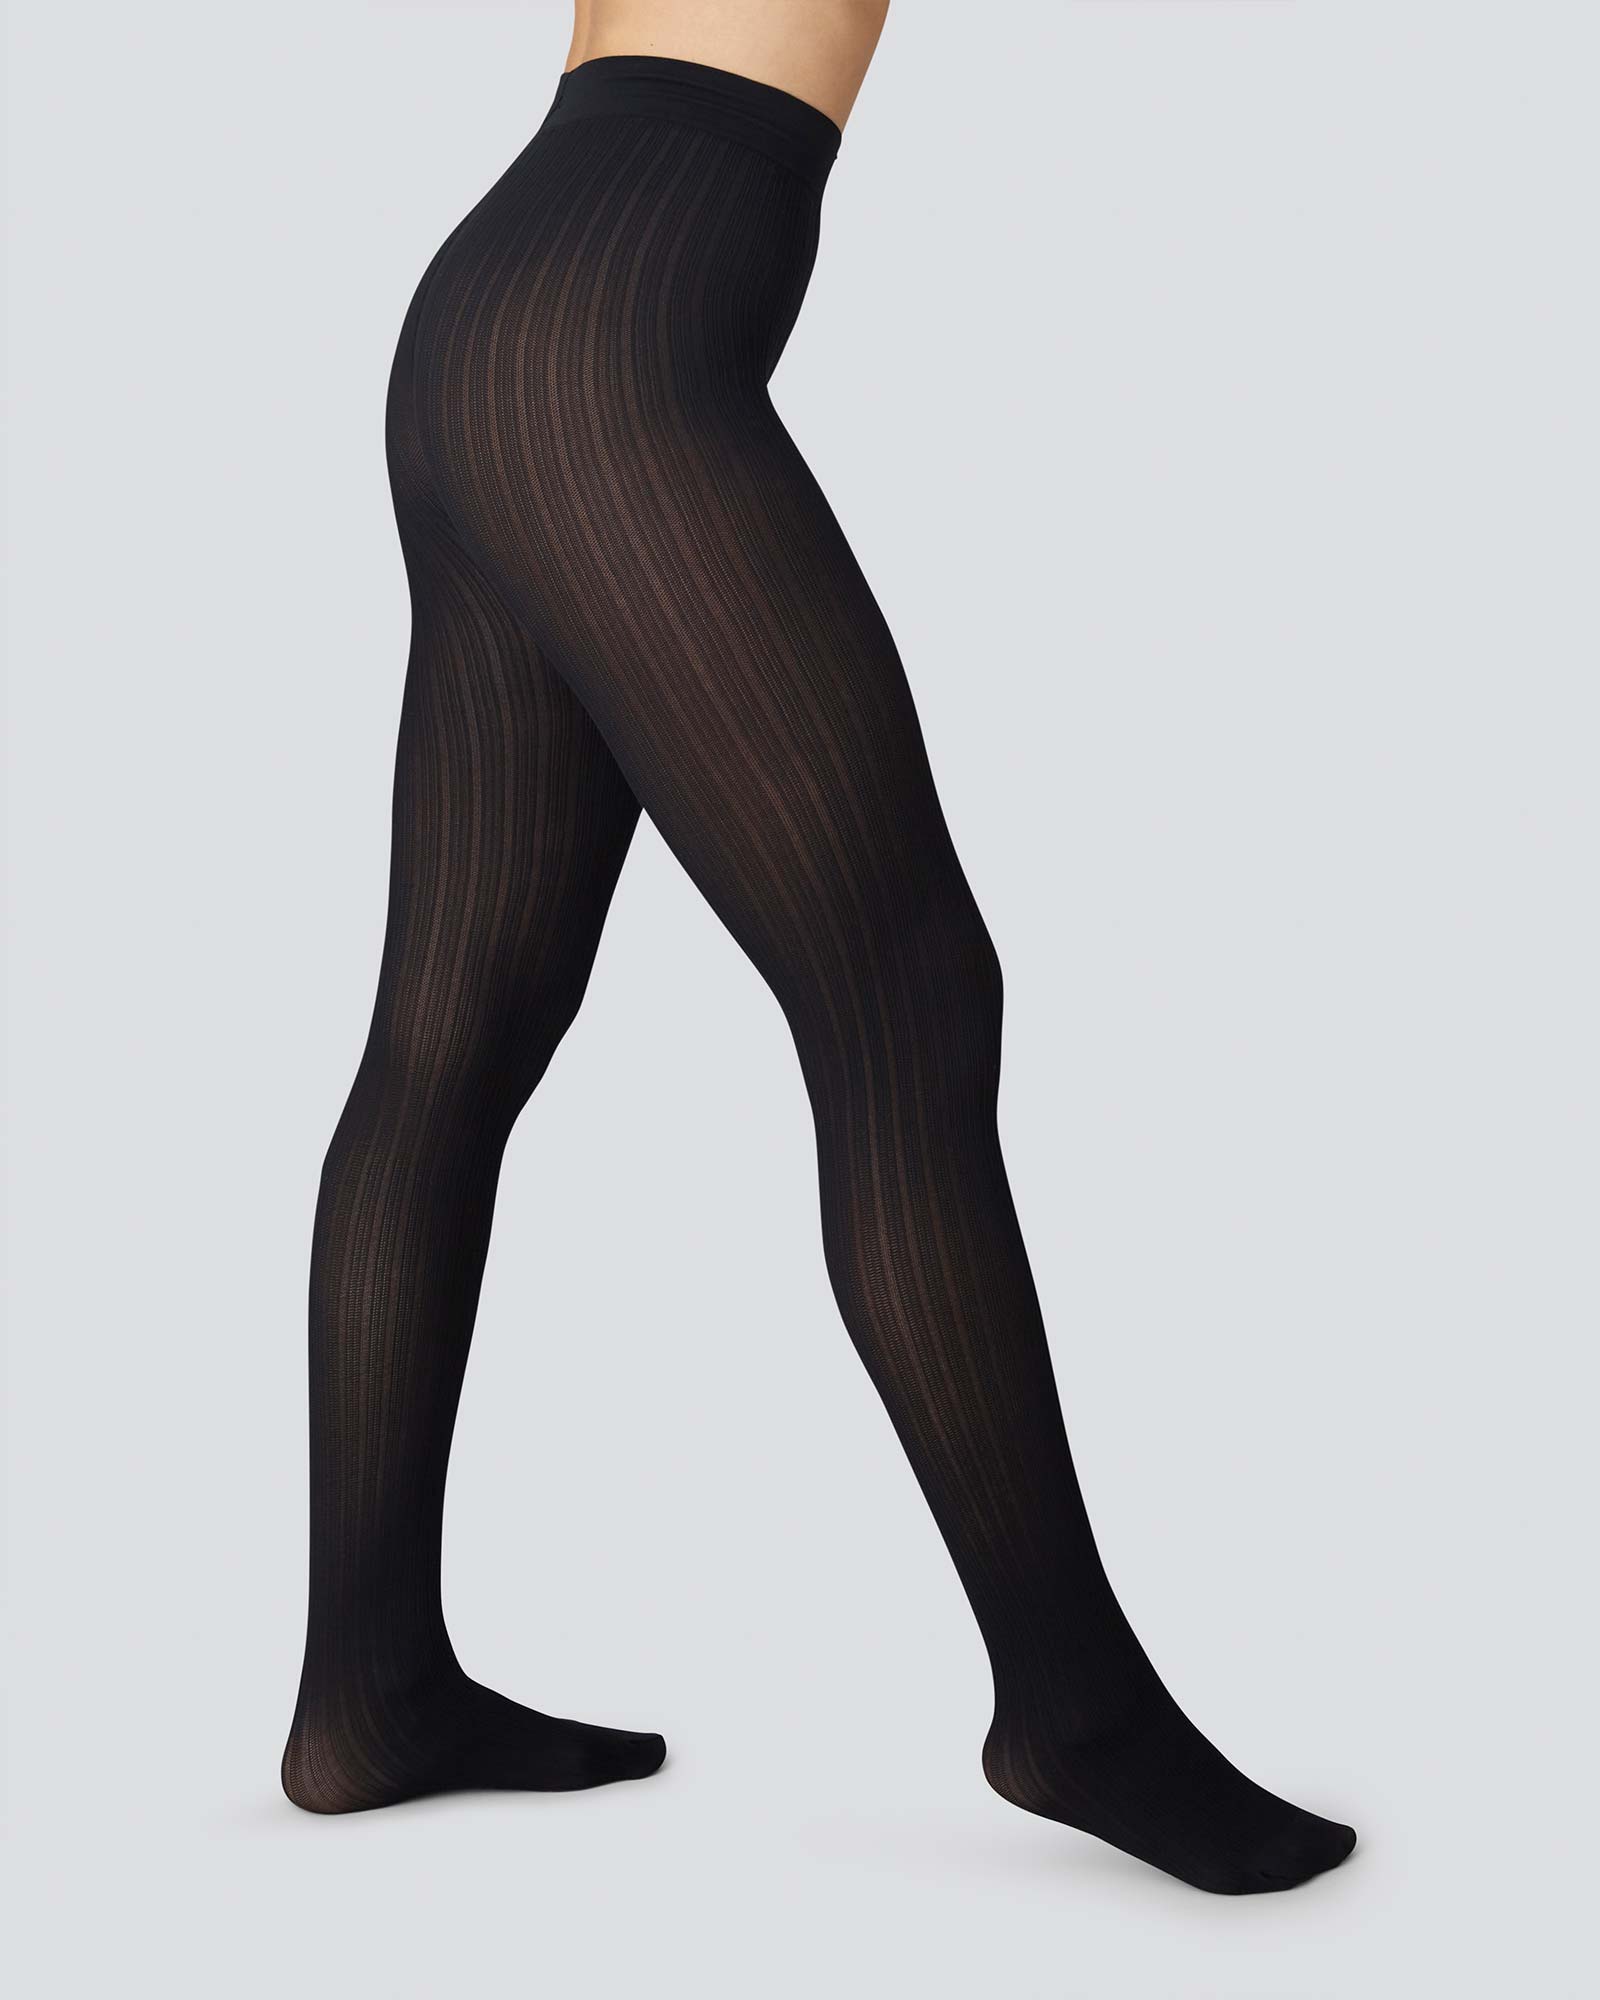 Denier tights guide: What denier means and how each number looks